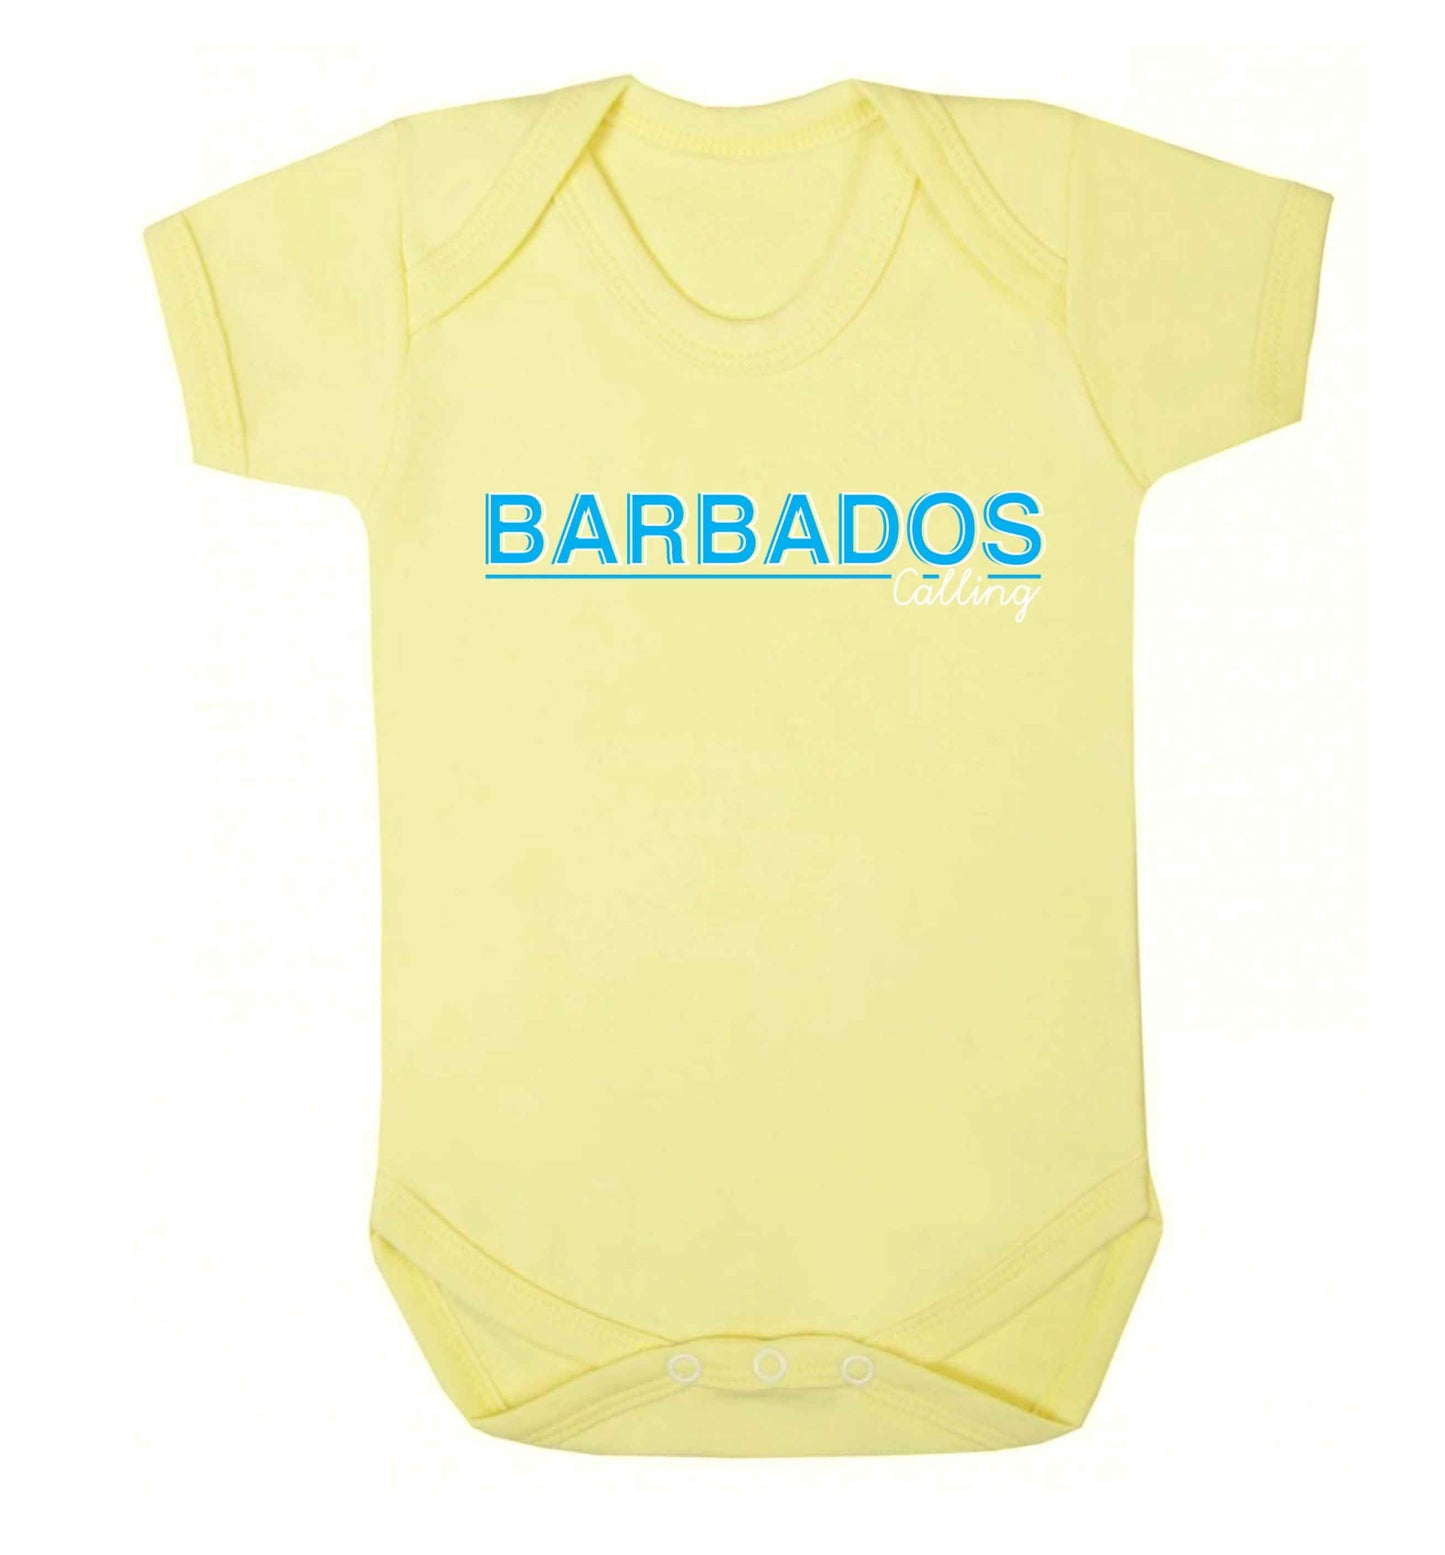 Barbados calling Baby Vest pale yellow 18-24 months